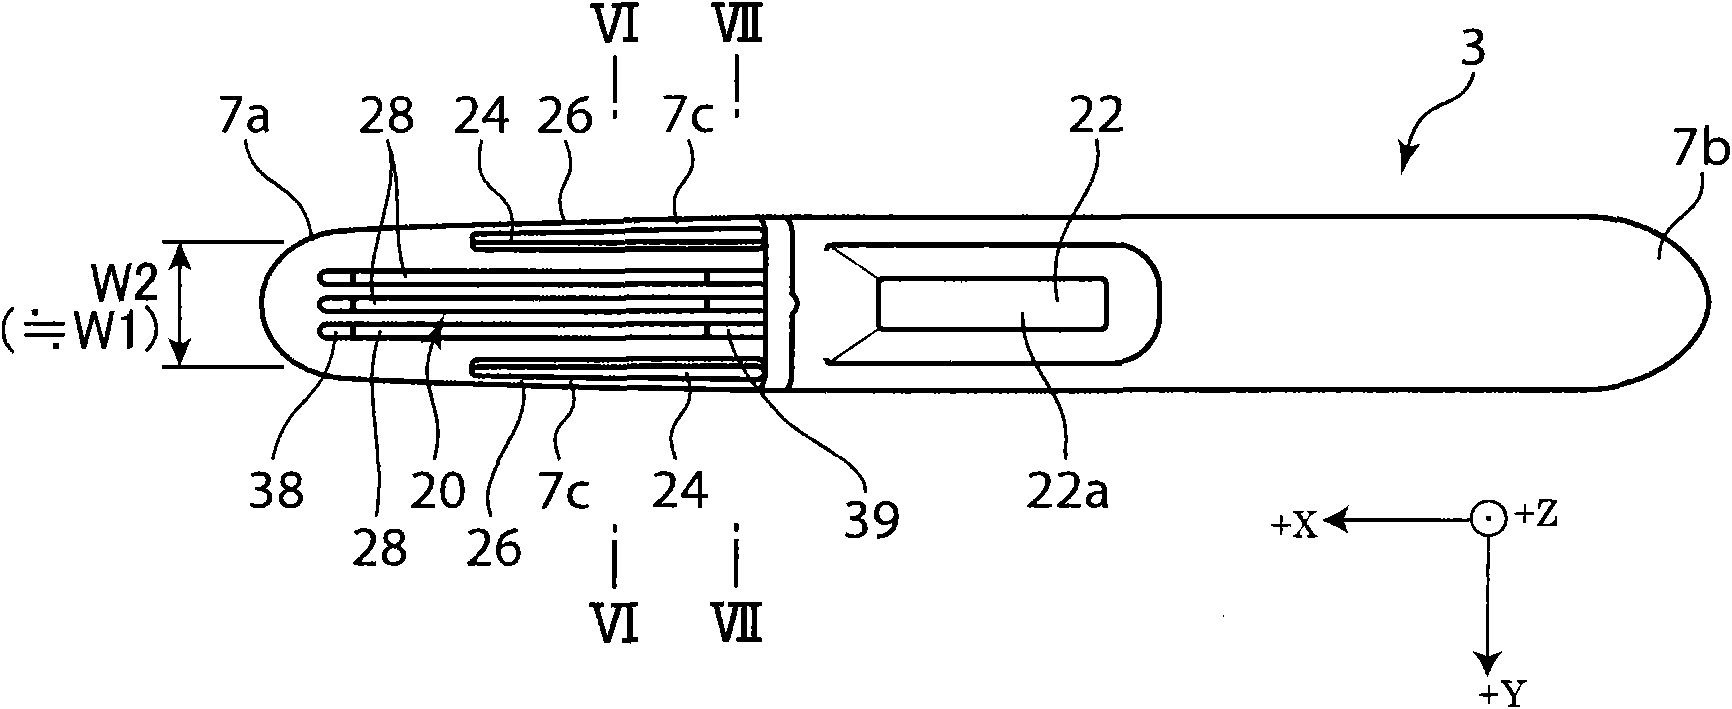 Urine examination apparatus and rod-like container